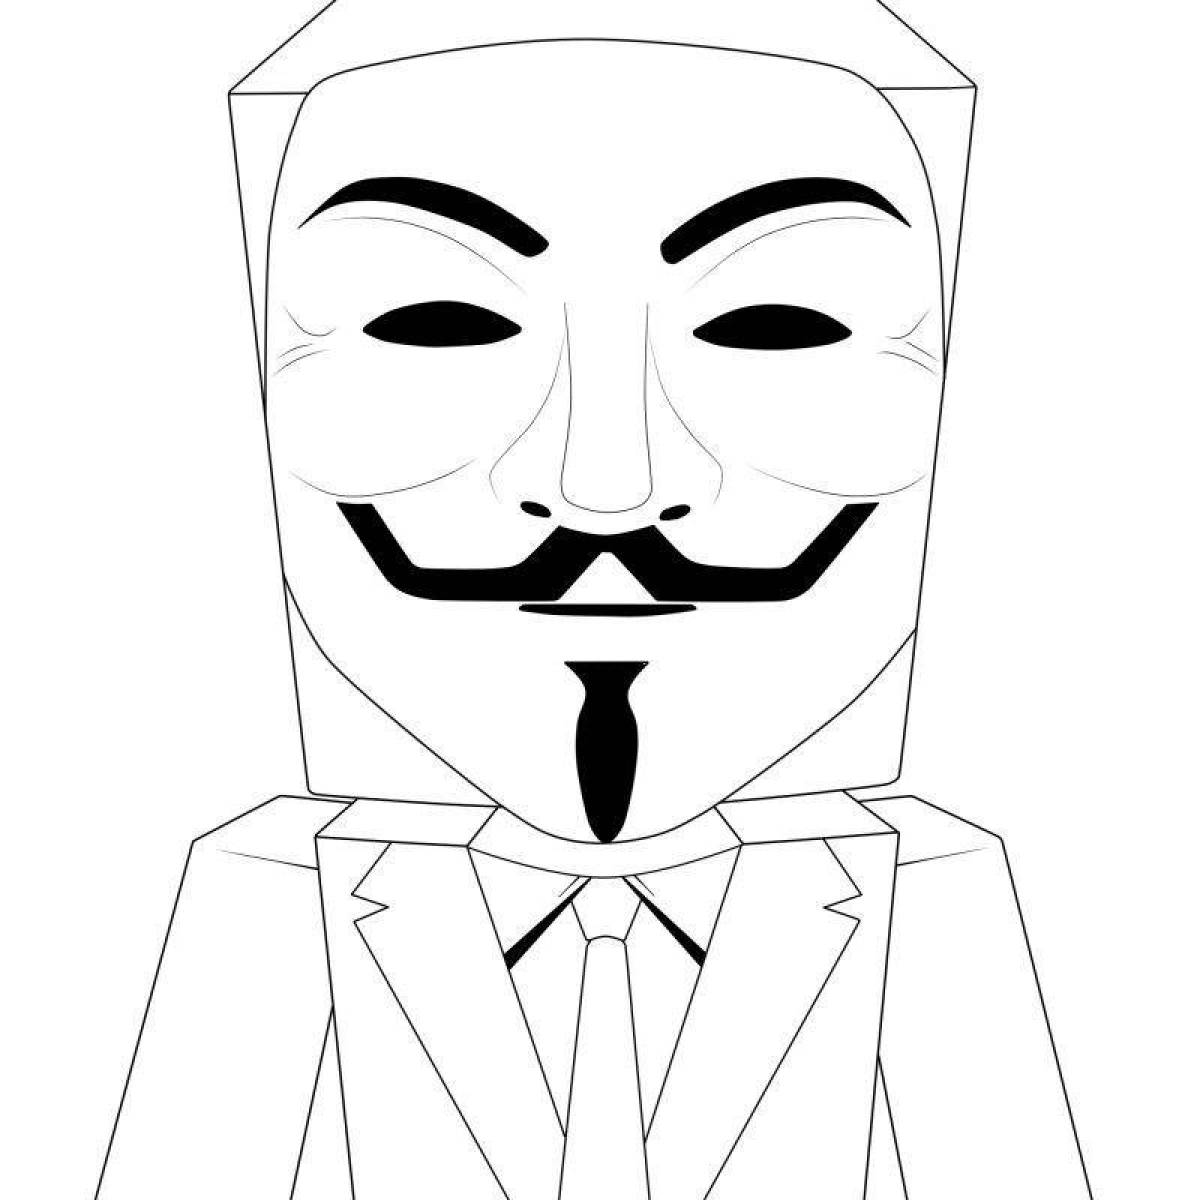 Coloring page elegant anonymous mask